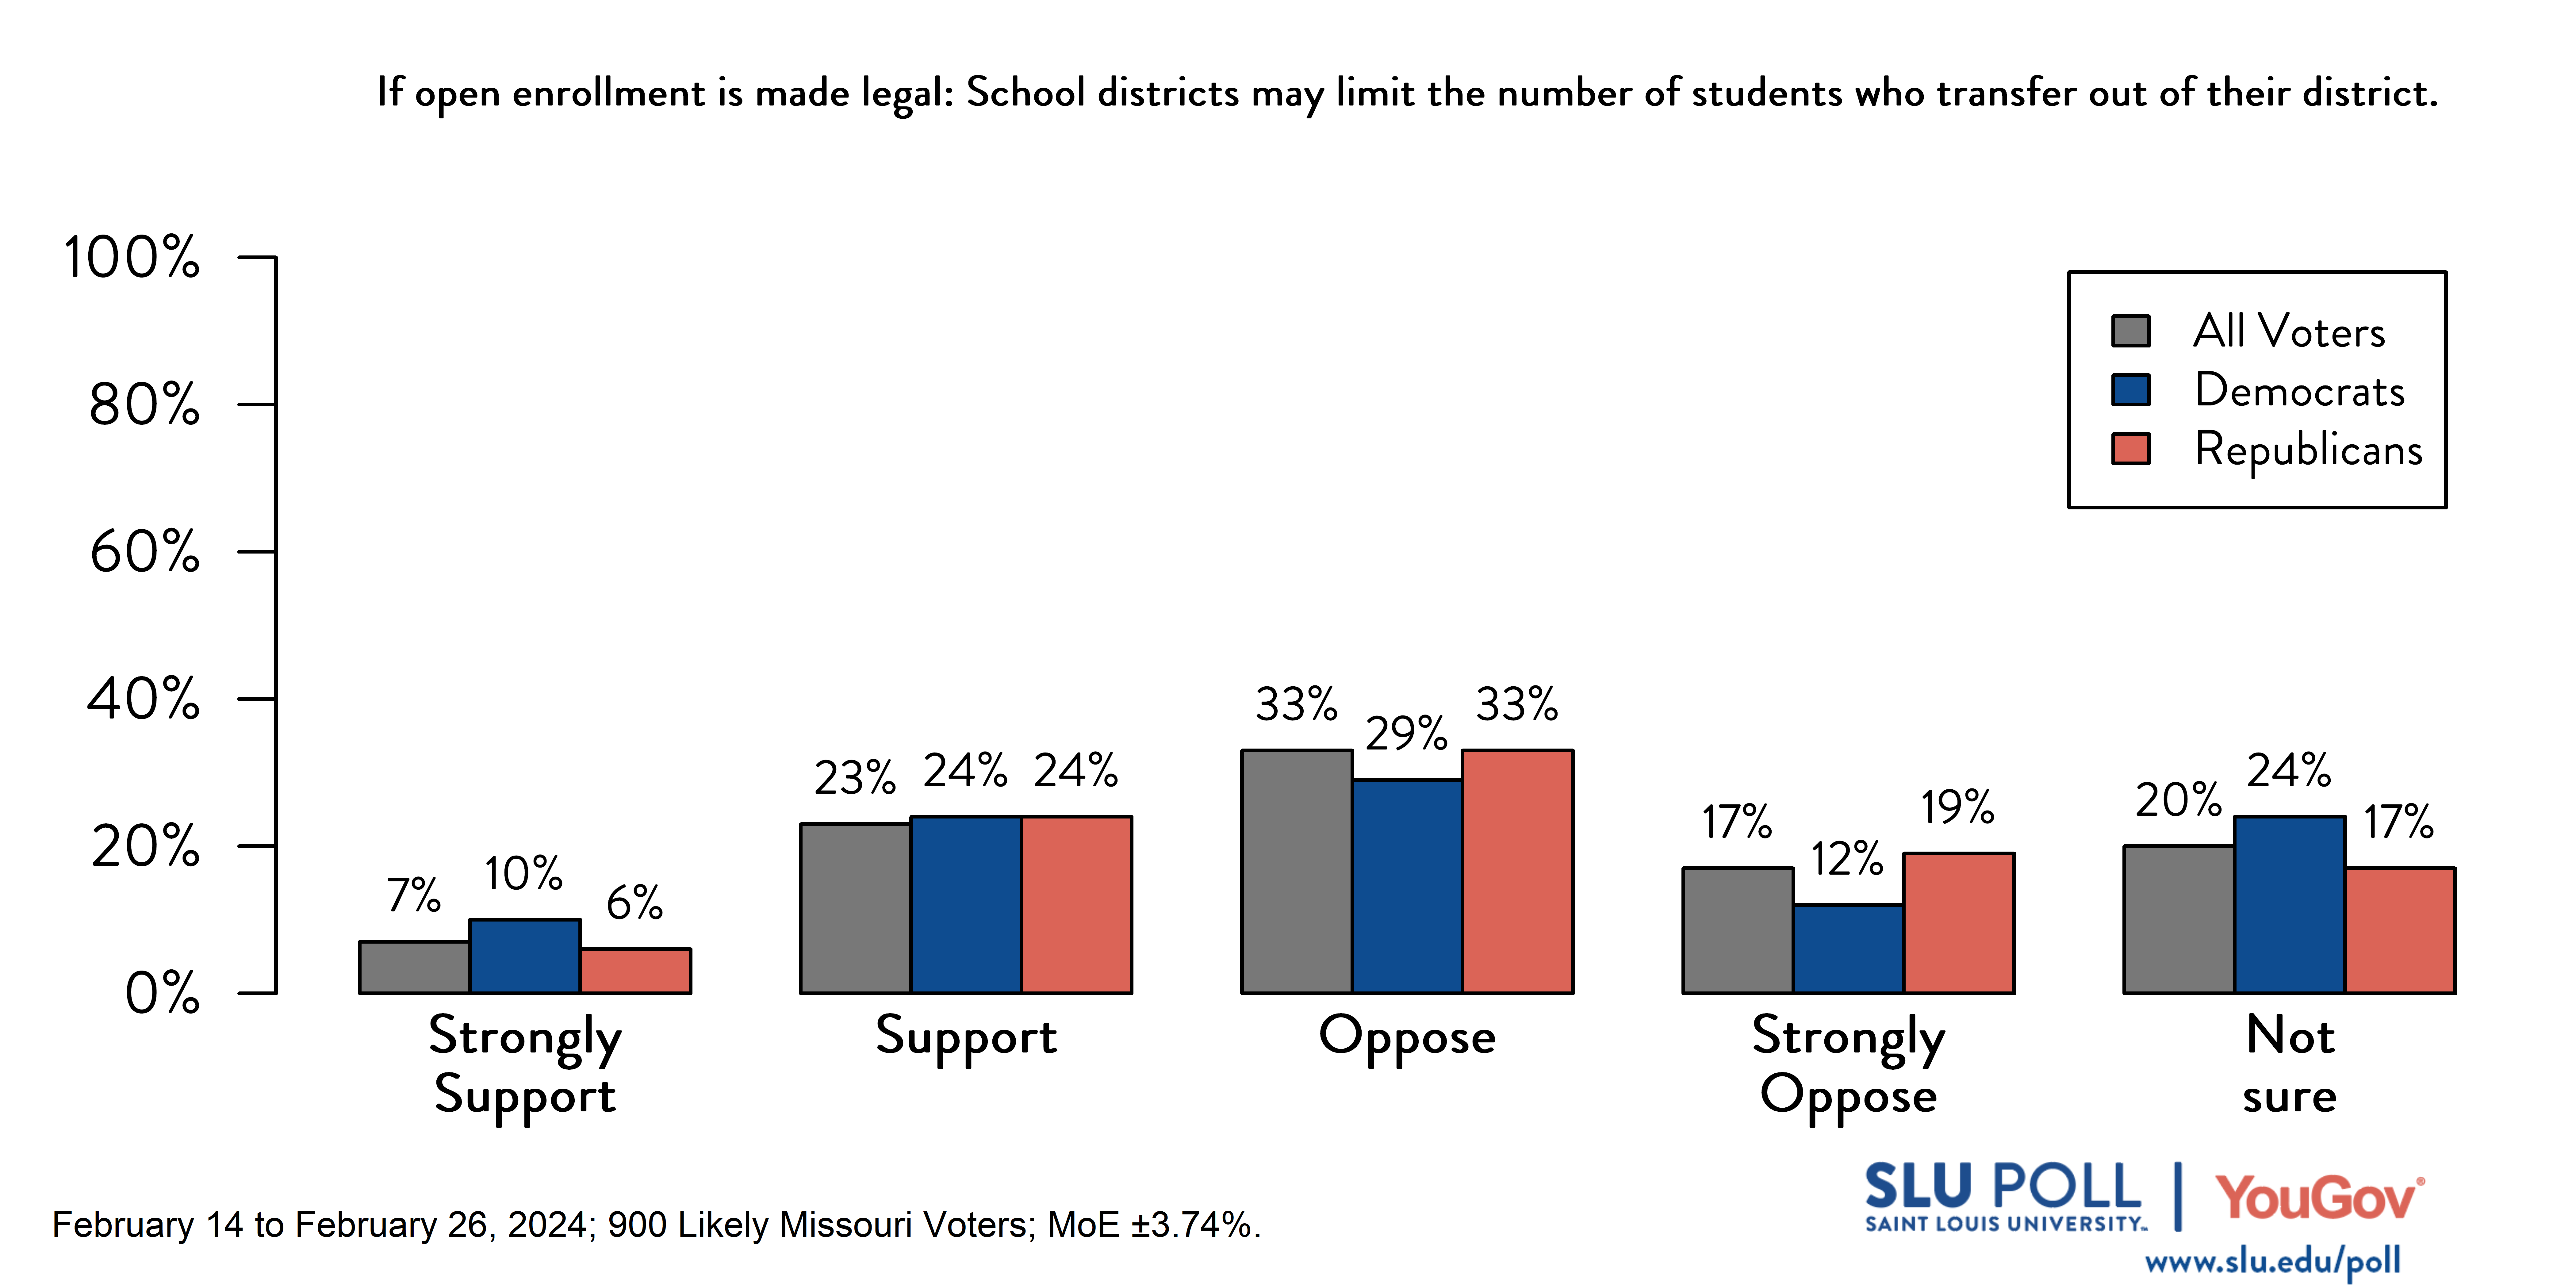 Likely voters' responses to 'If Missouri allows students to enroll in public schools outside their residential school districts (that is, the district where they live), indicate whether you support or oppose the following…School districts may limit the number of students who transfer out of their district?': 7% Strongly support, 23% Support, 33% Oppose, 17% Strongly oppose, and 20% Not sure. Democratic voters' responses: ' 10% Strongly support, 24% Support, 29% Oppose, 12% Strongly oppose, and 24% Not sure. Republican voters' responses:  6% Strongly support, 24% Support, 33% Oppose, 19% Strongly oppose, and 17% Not sure.